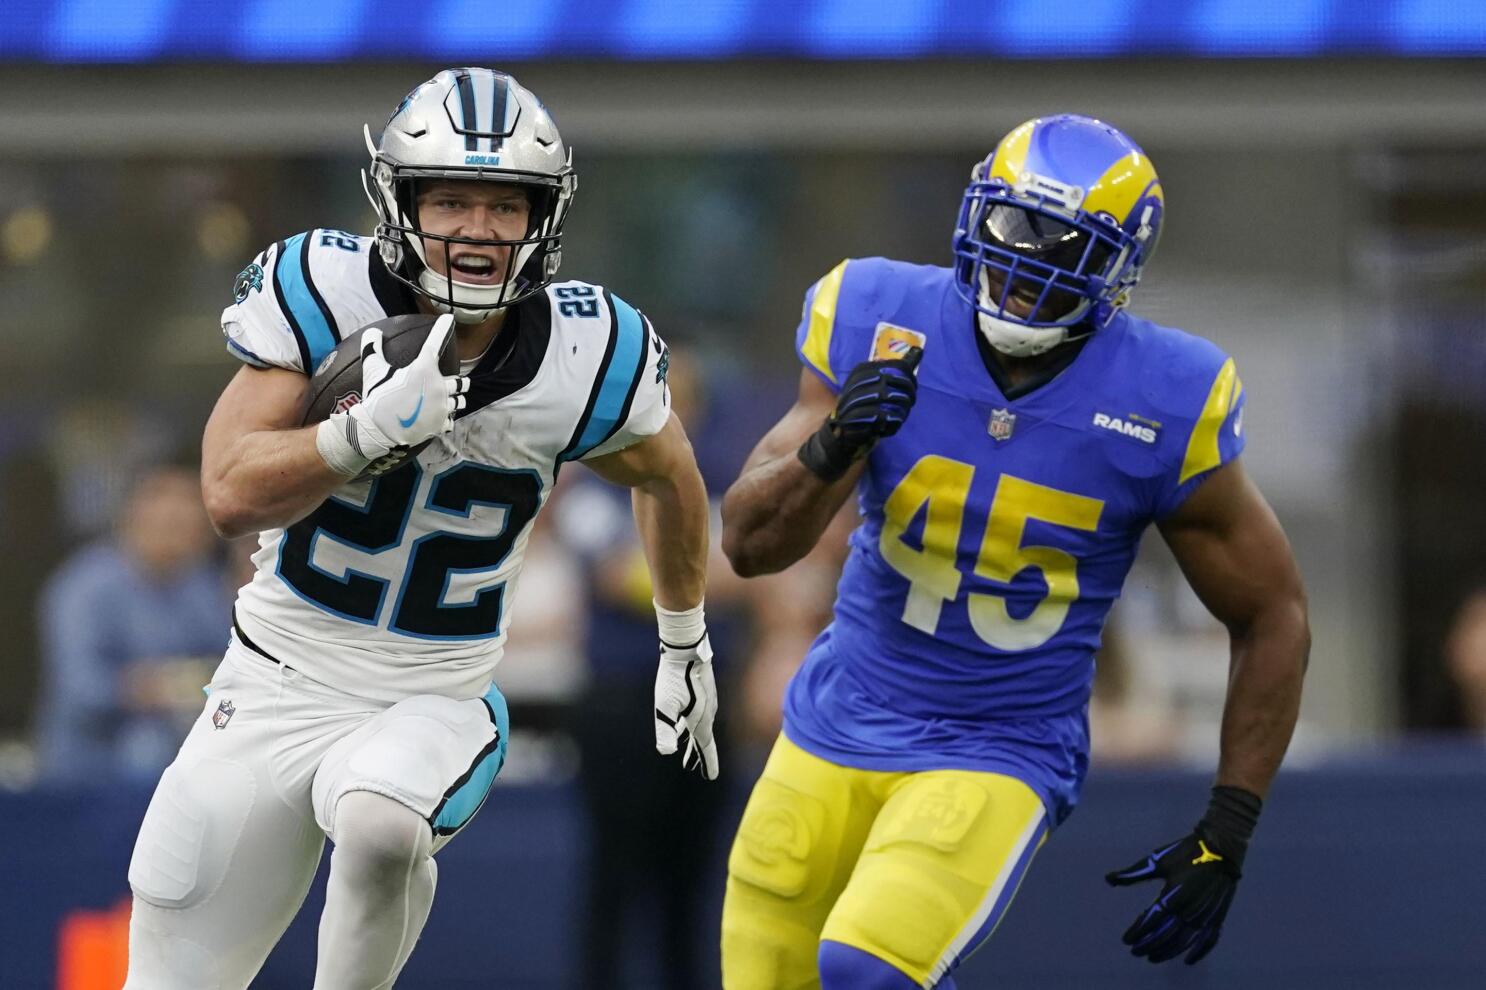 Christian McCaffrey is One Step Closer to Playing for a Super Bowl